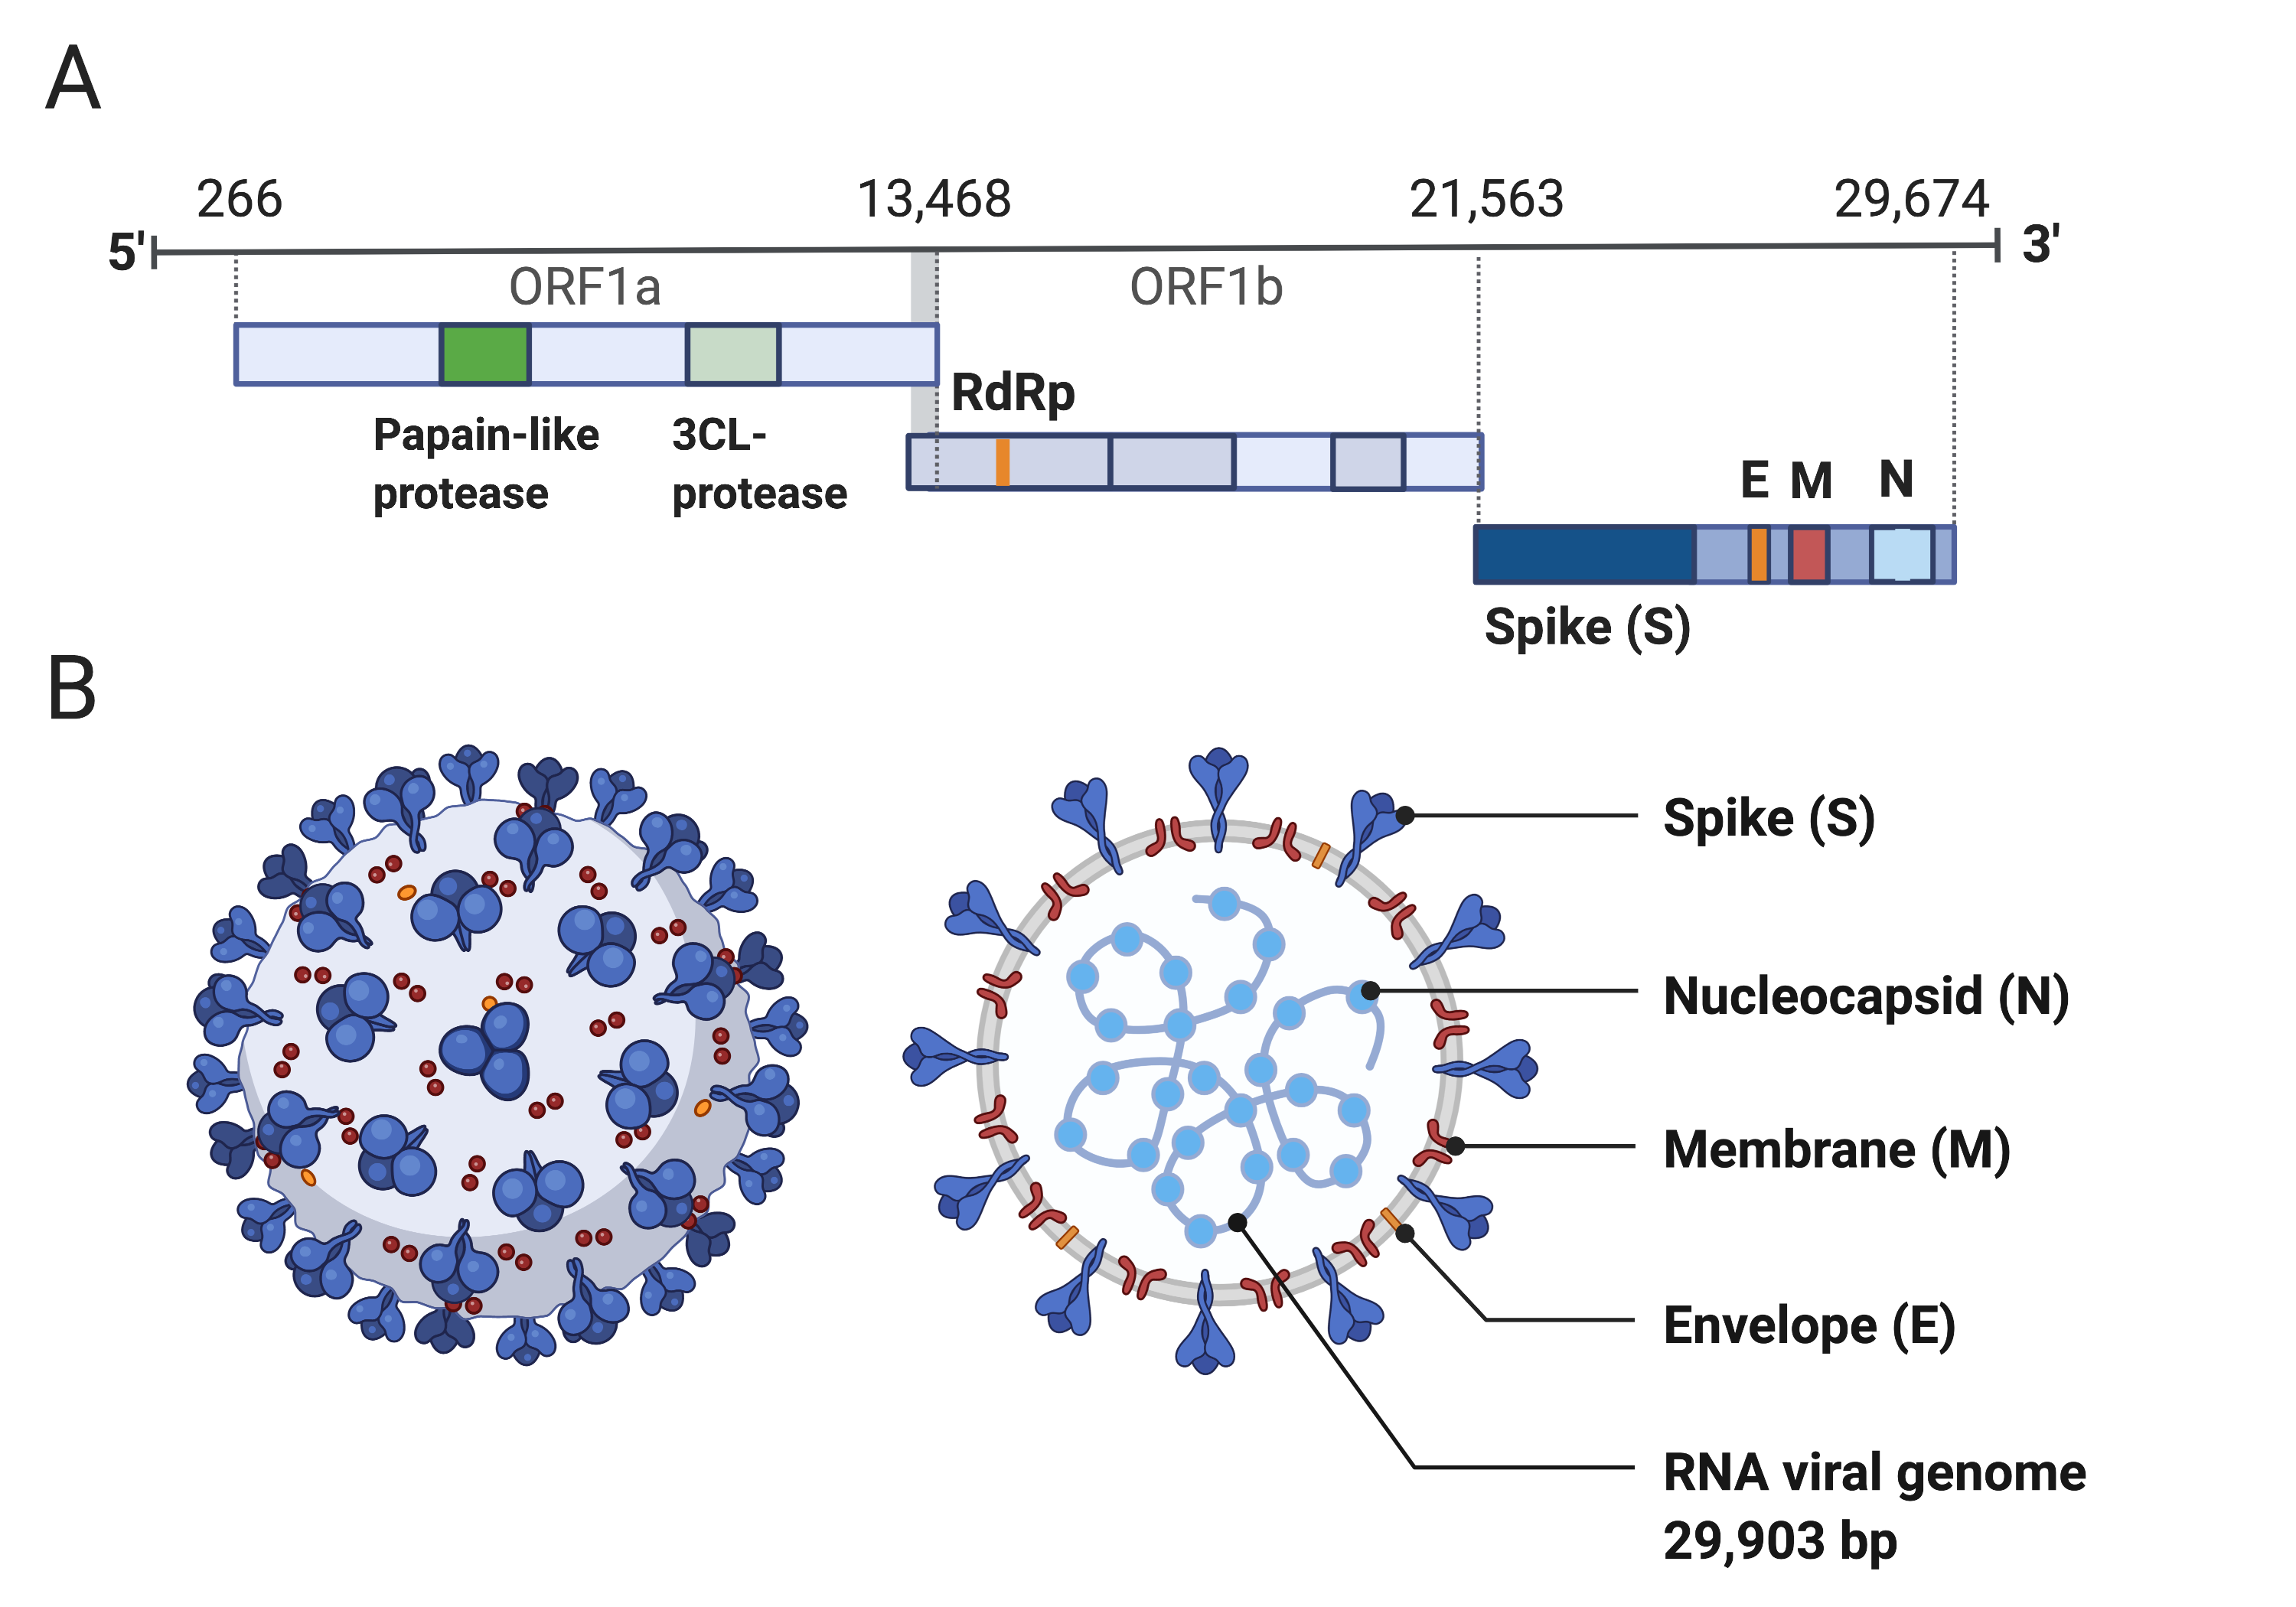 Figure 1: Structure of SARS-CoV-2 capsid and genome. A) The genomic structure of coronaviruses is highly conserved and includes three main regions. Open reading frames (ORF) 1a and 1b contain two polyproteins that encode the non-structural proteins (nsp). The nsp include enzymes such as RNA-dependent RNA Polymerase (RdRp). The last third of the genome encodes structural proteins, including the spike (S), envelope (E), membrane (M) and nucleocapsid (N) proteins. Accessory genes can also be interspersed throughout the genome (18). B) The physical structure of the coronavirus virion, including the components determined by the conserved structural proteins S, E, M and N. This figure was adapted from “Human Coronavirus Structure”, by BioRender.com (2020), retrieved from https://app.biorender.com/biorender-templates.